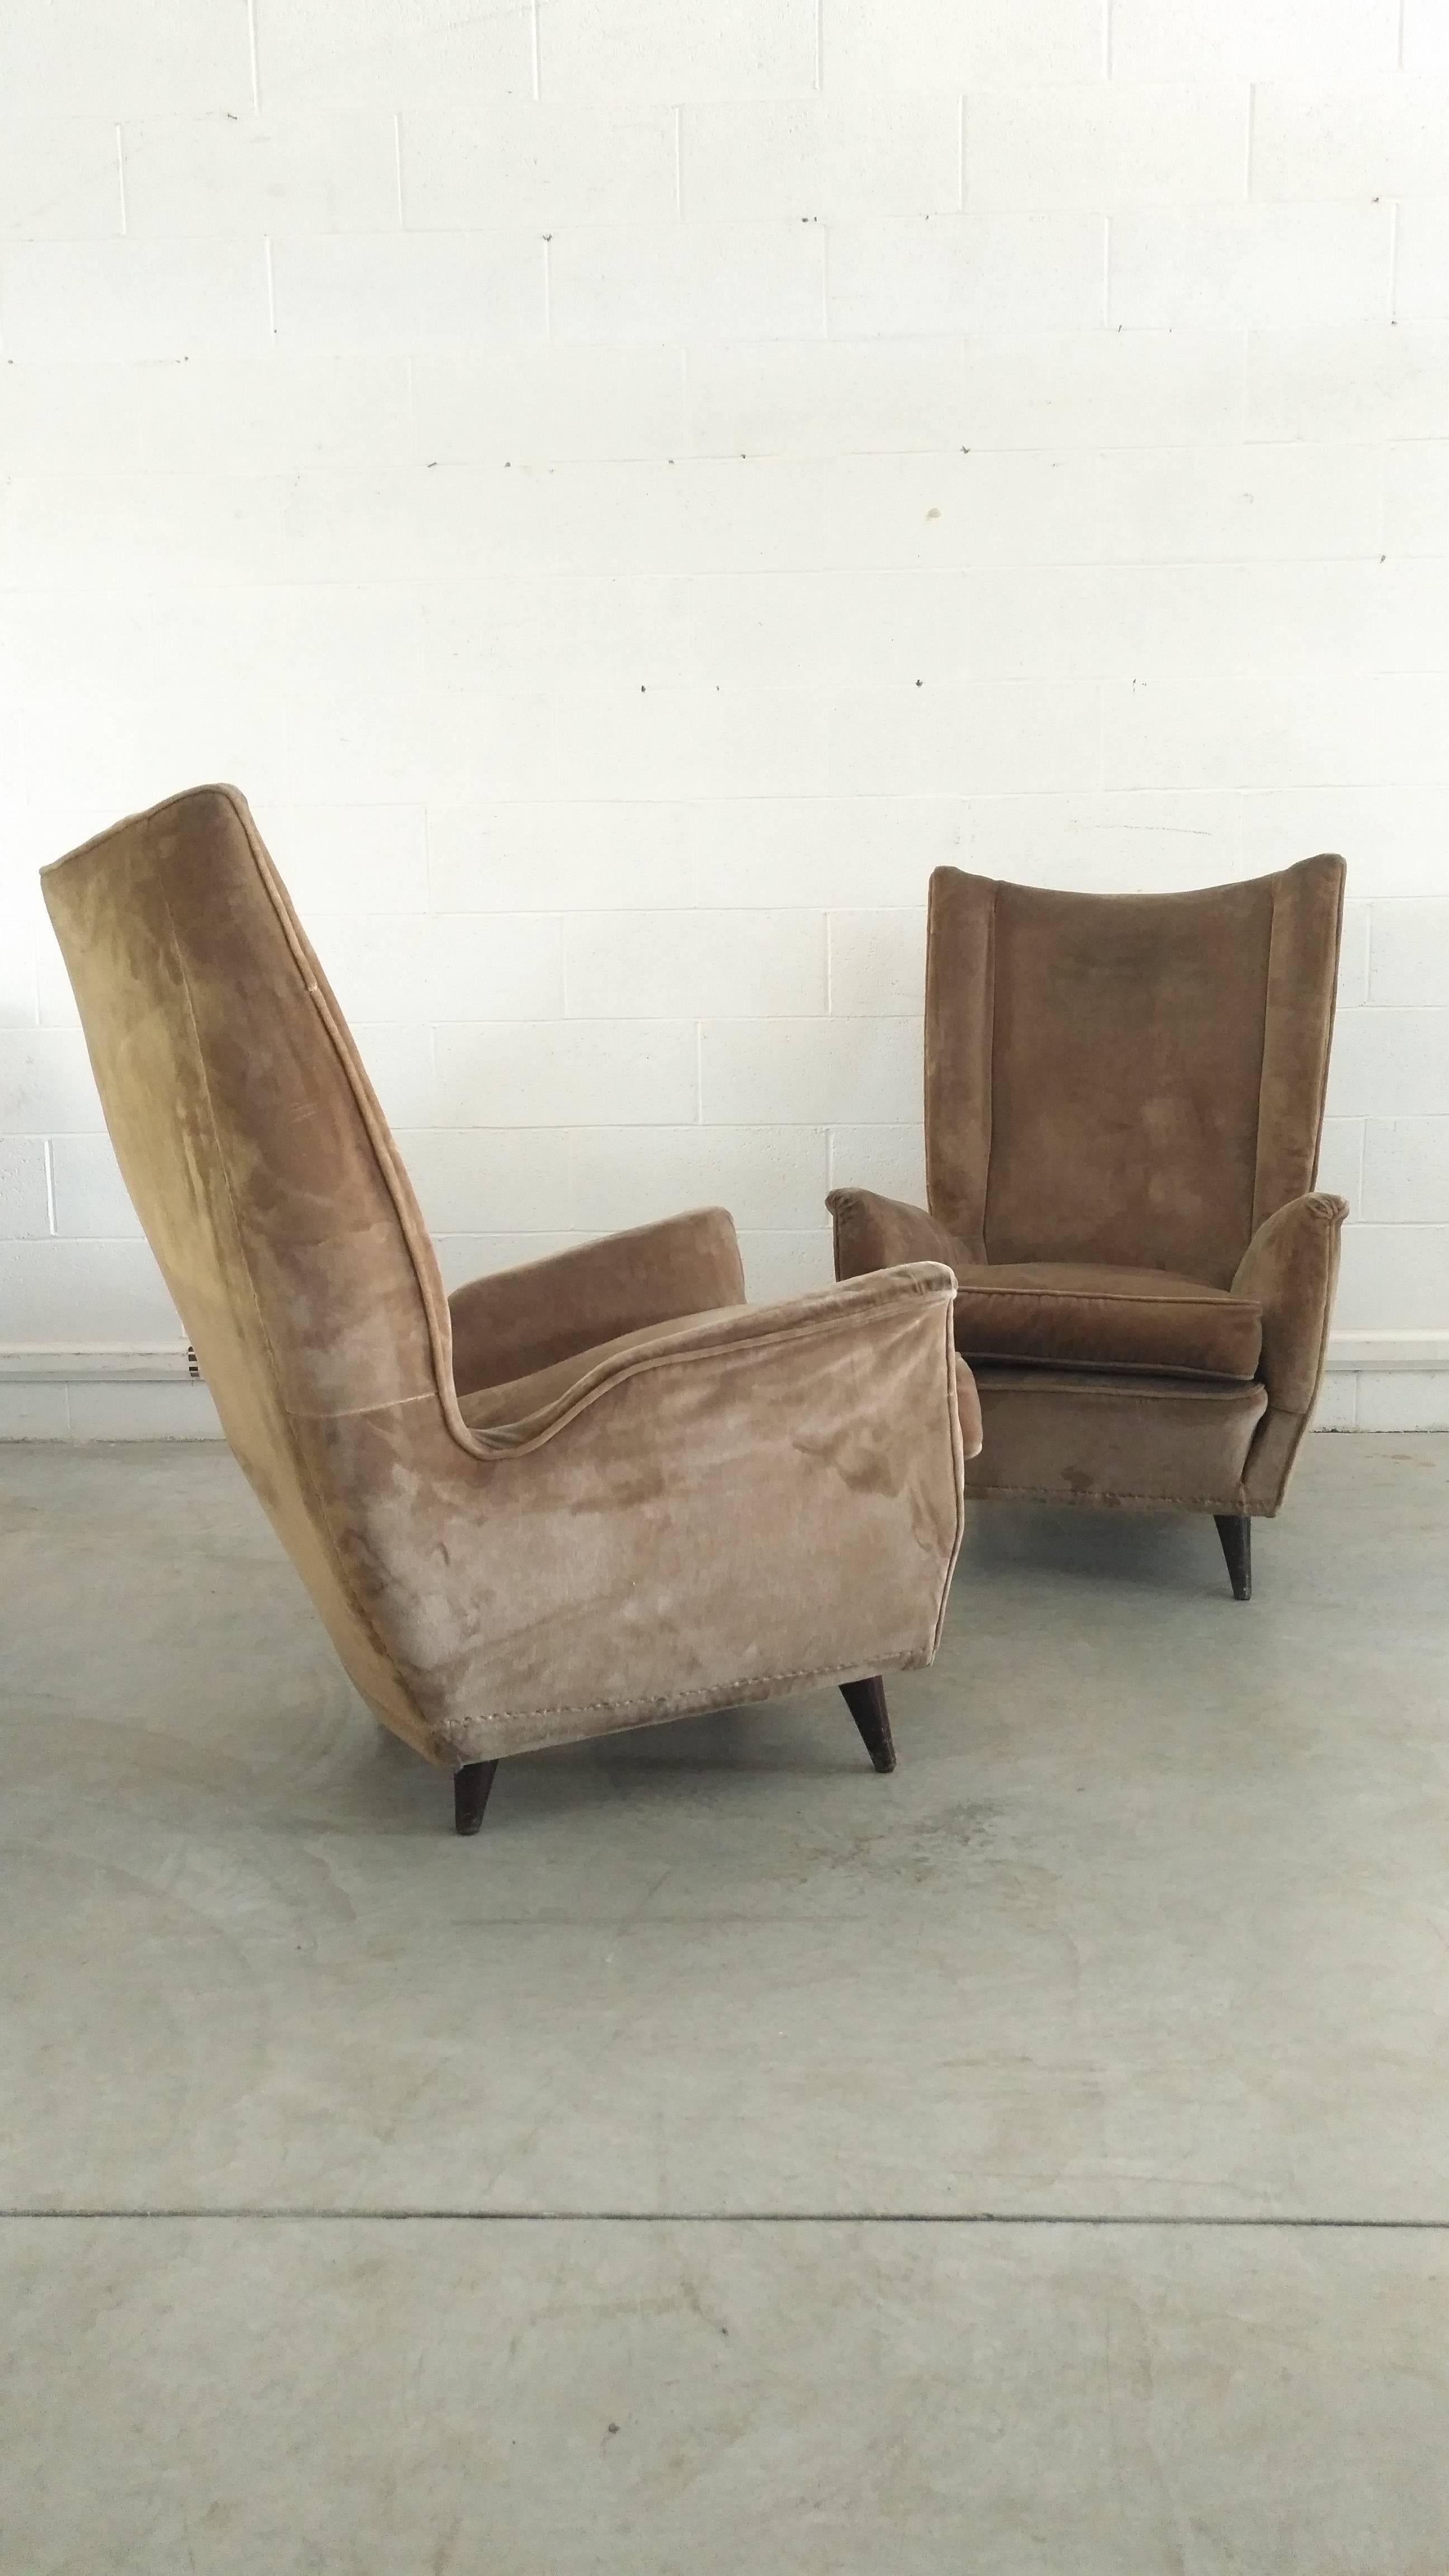 Hand-Carved Pair of Armchairs by Isa Bergamo Attributed Gio Ponti, 1950